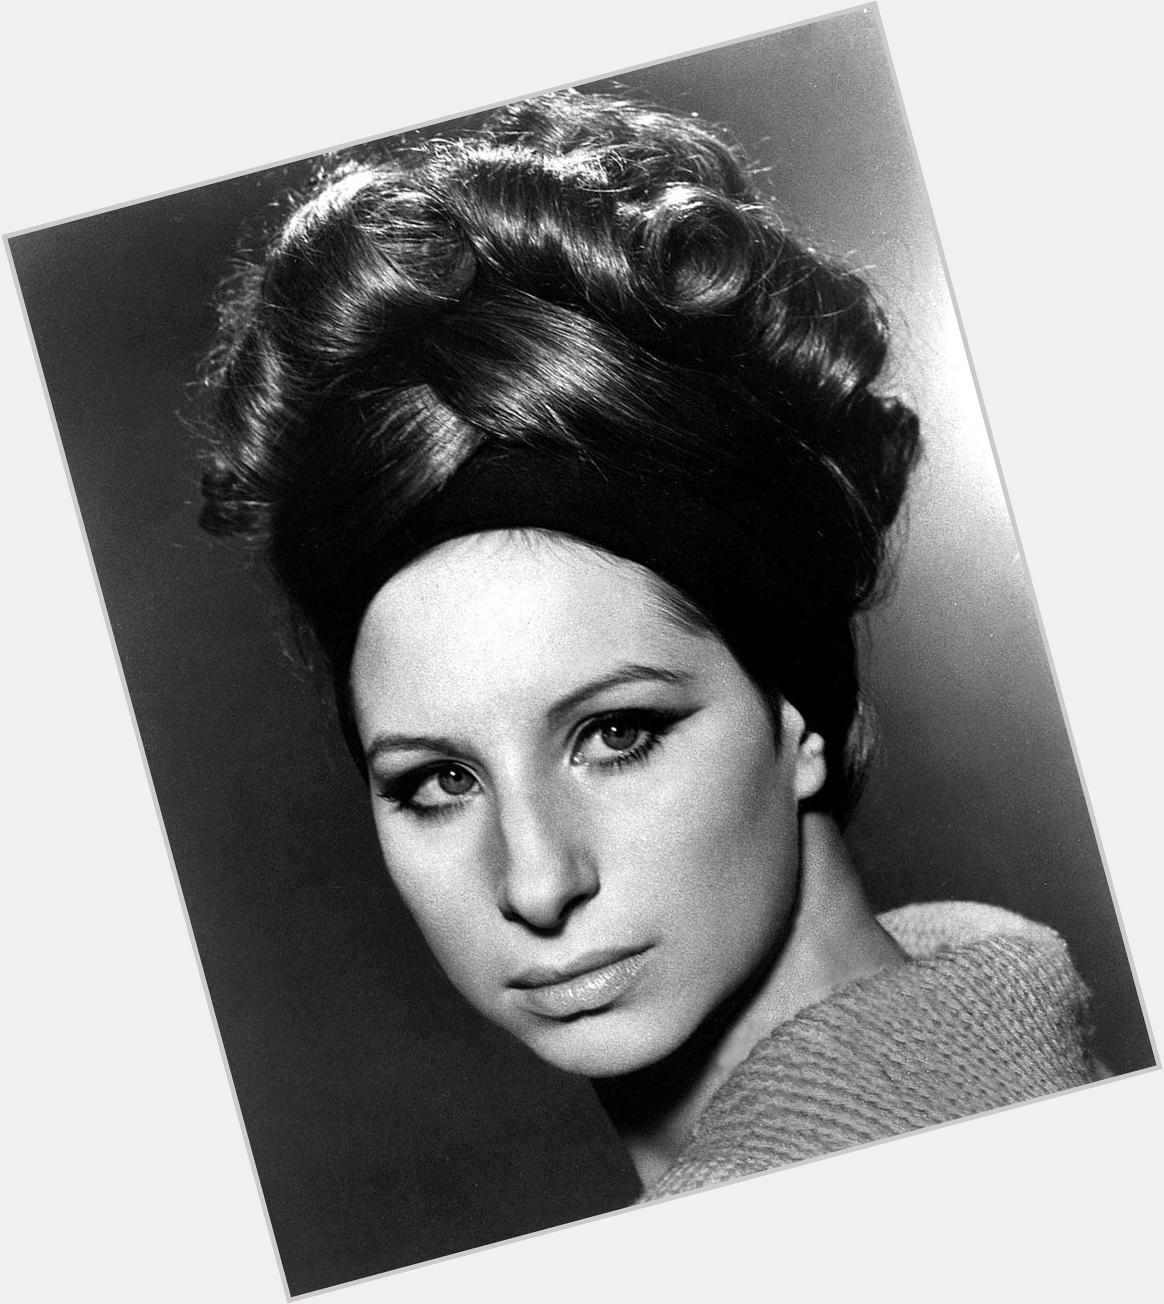 73 years ago, one of the most talented female vocalists was born, Barbra Streisand, Happy Birthday. I love you    